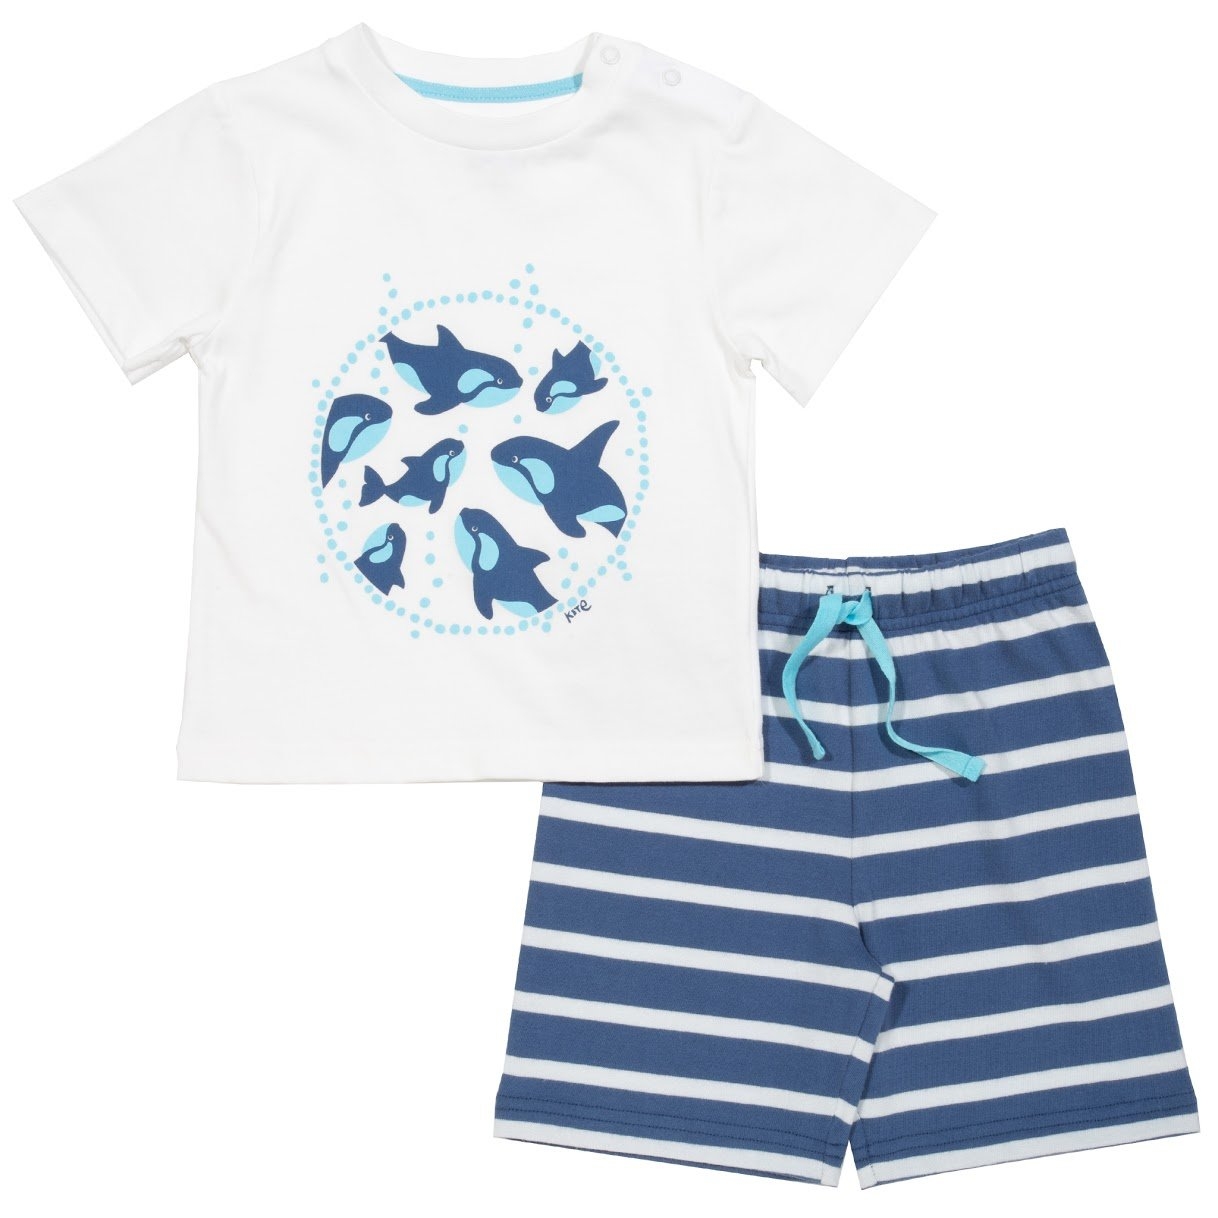 Kite Toddler Orca Pod Organic Cotton T-shirt and Shorts Set – Blue and White Stripe – 18-24 months